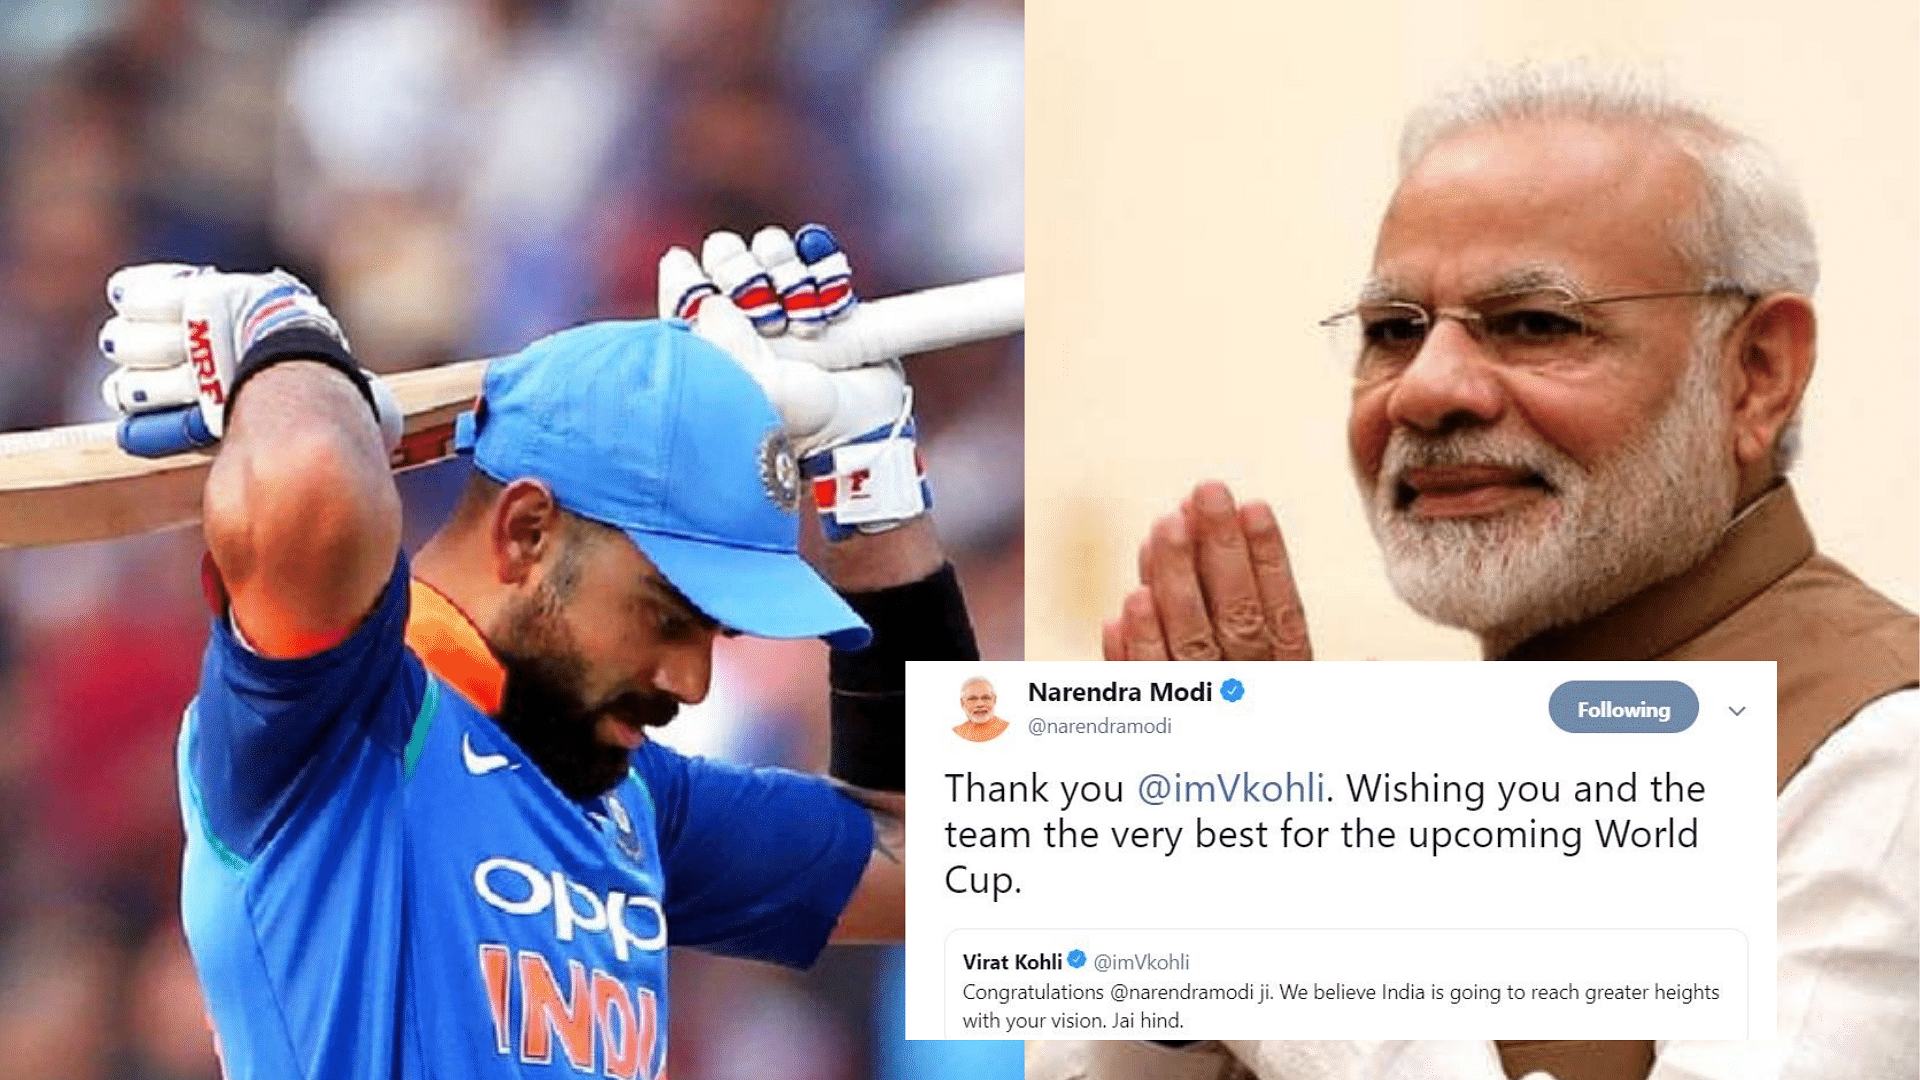 Prime Minister Narendra Modi took to Twitter and wished Virat Kohli and the Indian cricket team all the best for the upcoming World Cup.